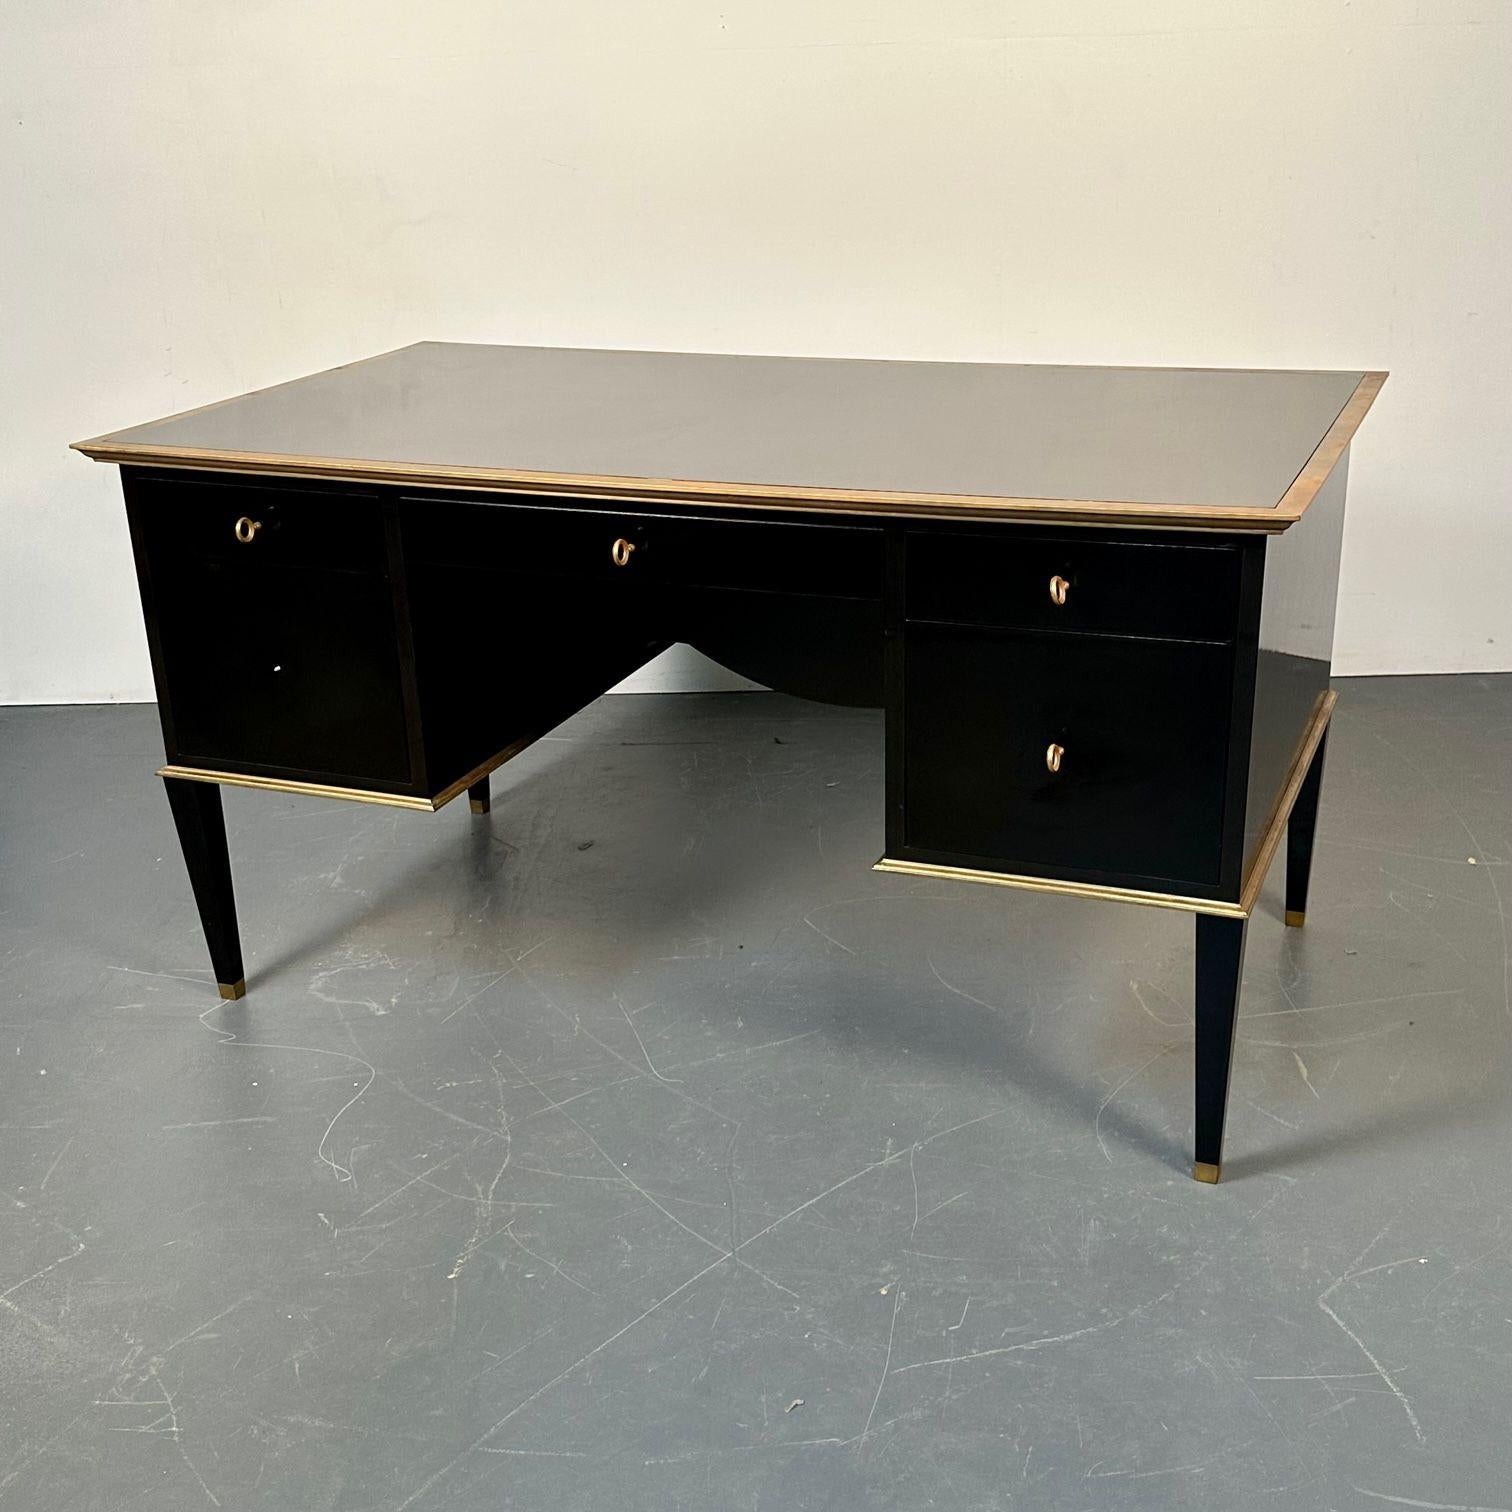 Contemporary French Hollywood Regency Style Ebony Lacquer Executive Desk / Writing Table For Sale